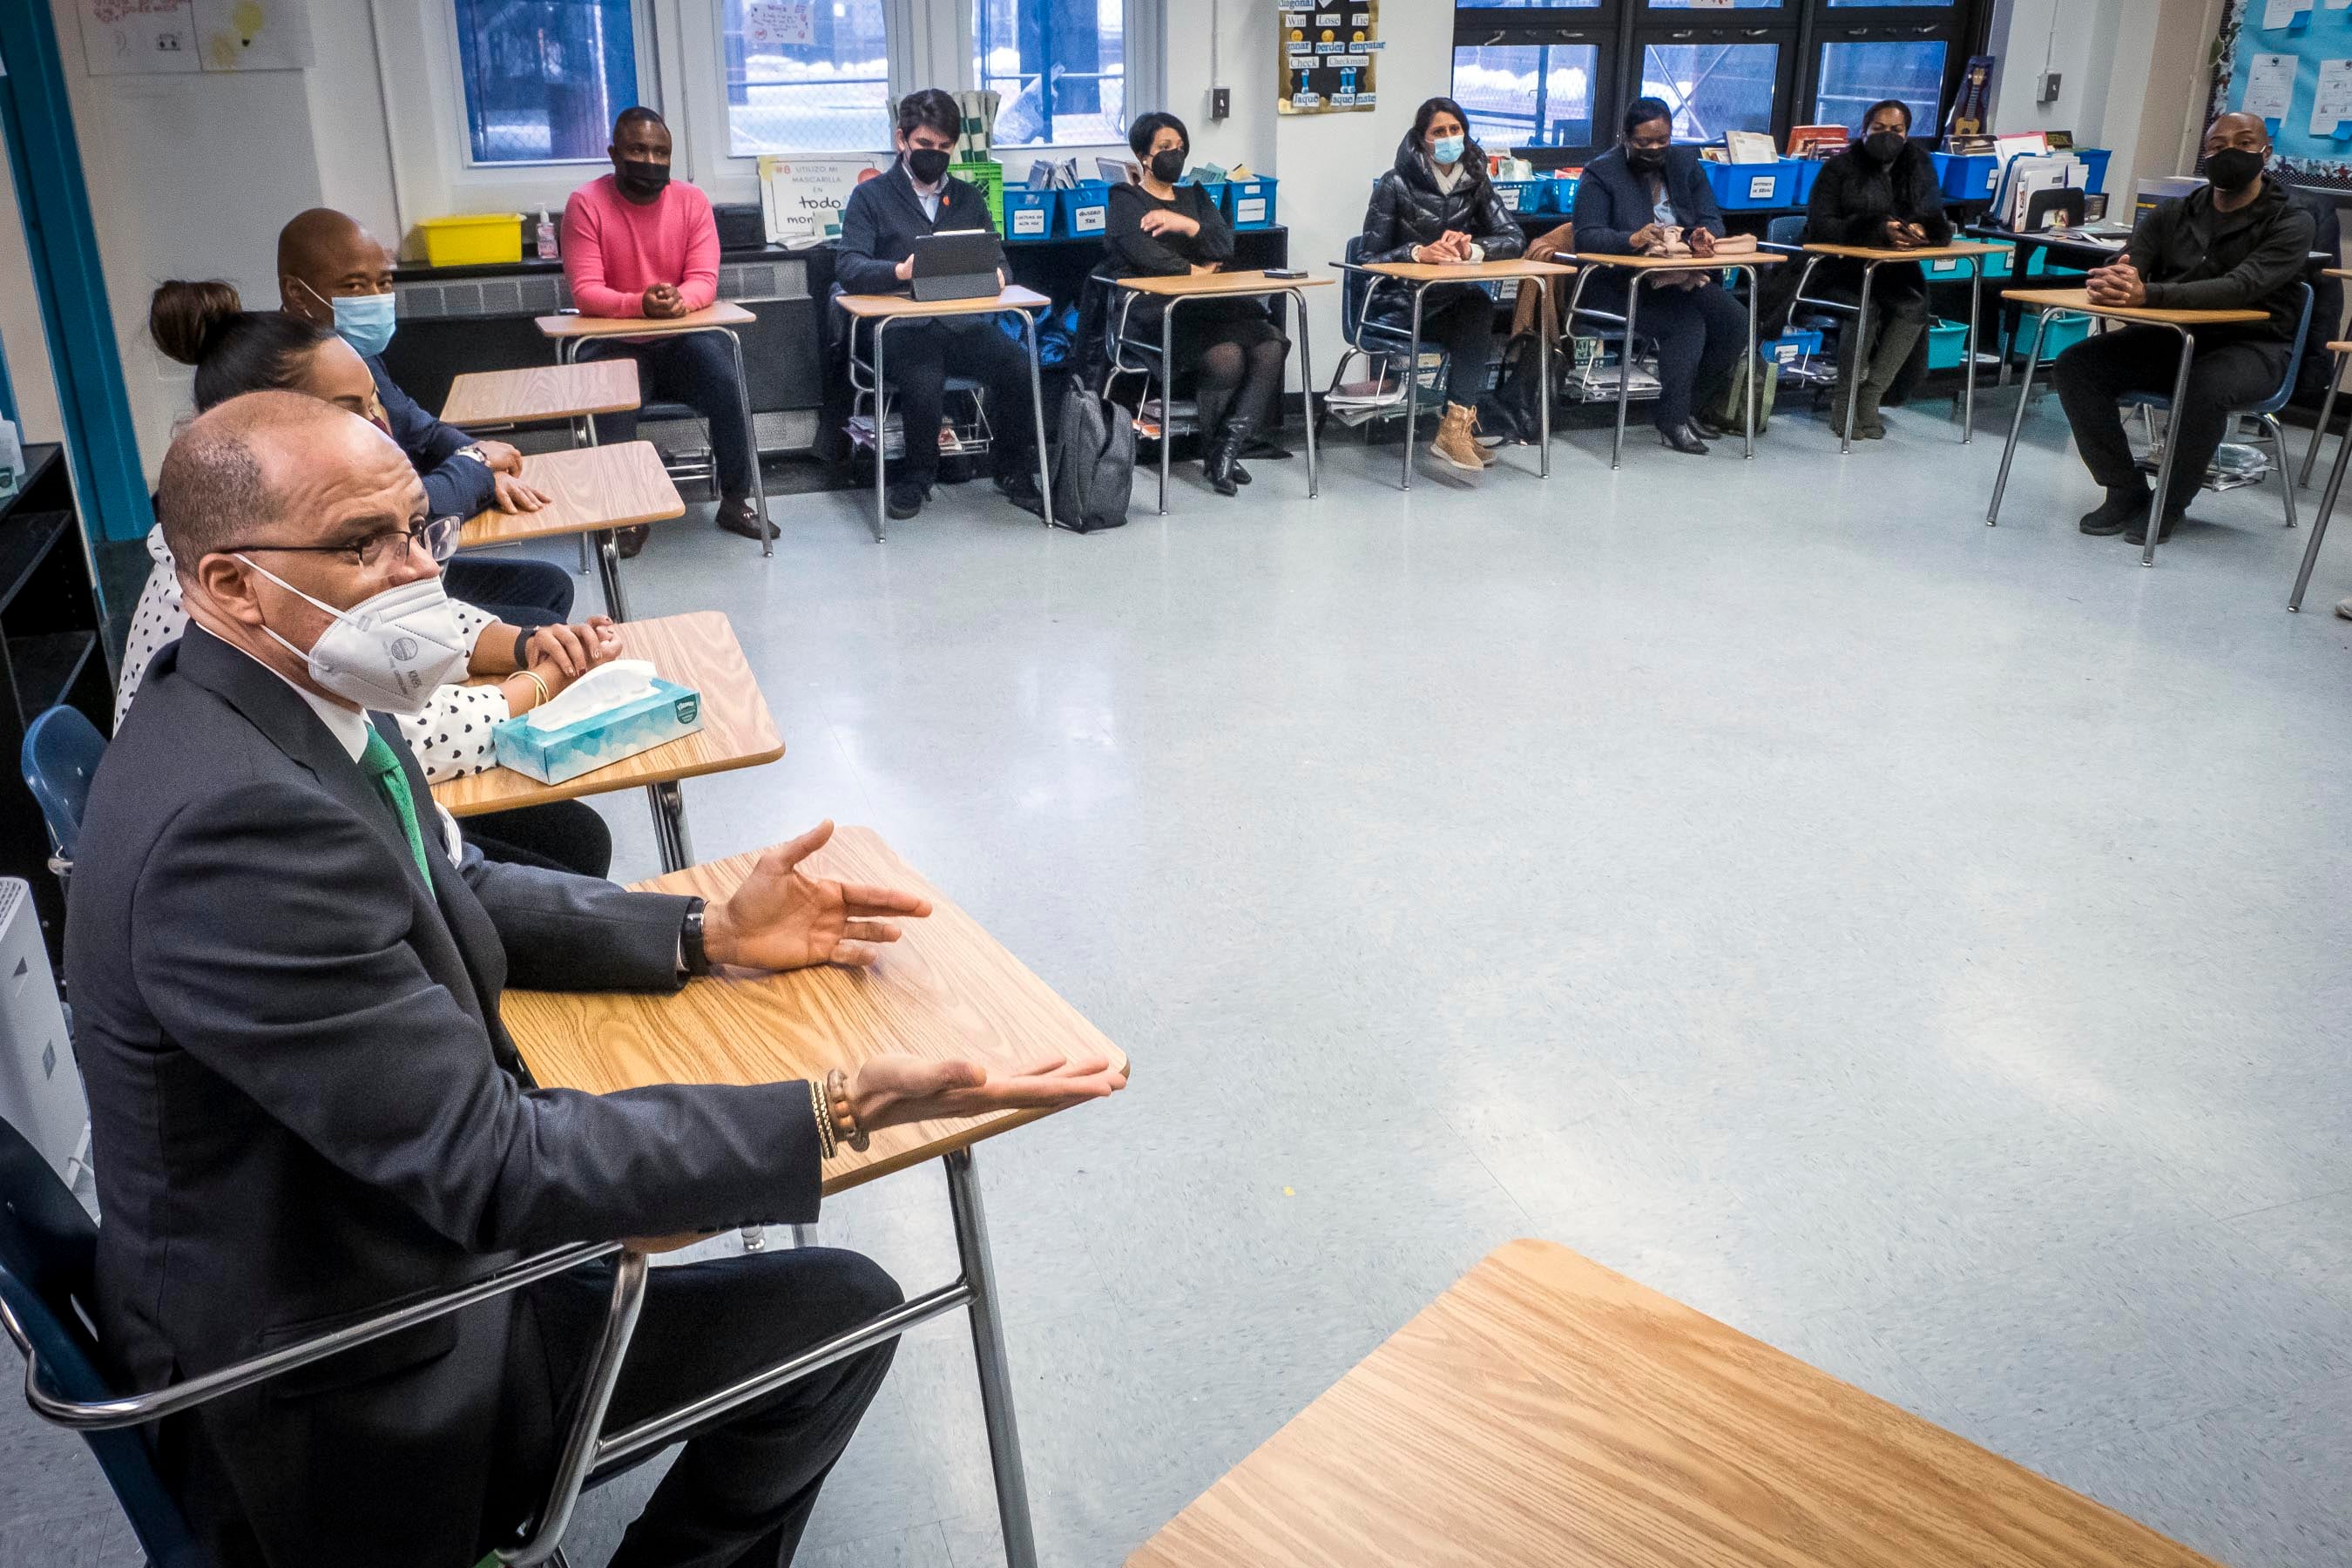 Chancellor David Banks, left, decided against making last-minute changes to the city’s complicated high school admissions process. Above, Banks visits a classroom in the Bronx.